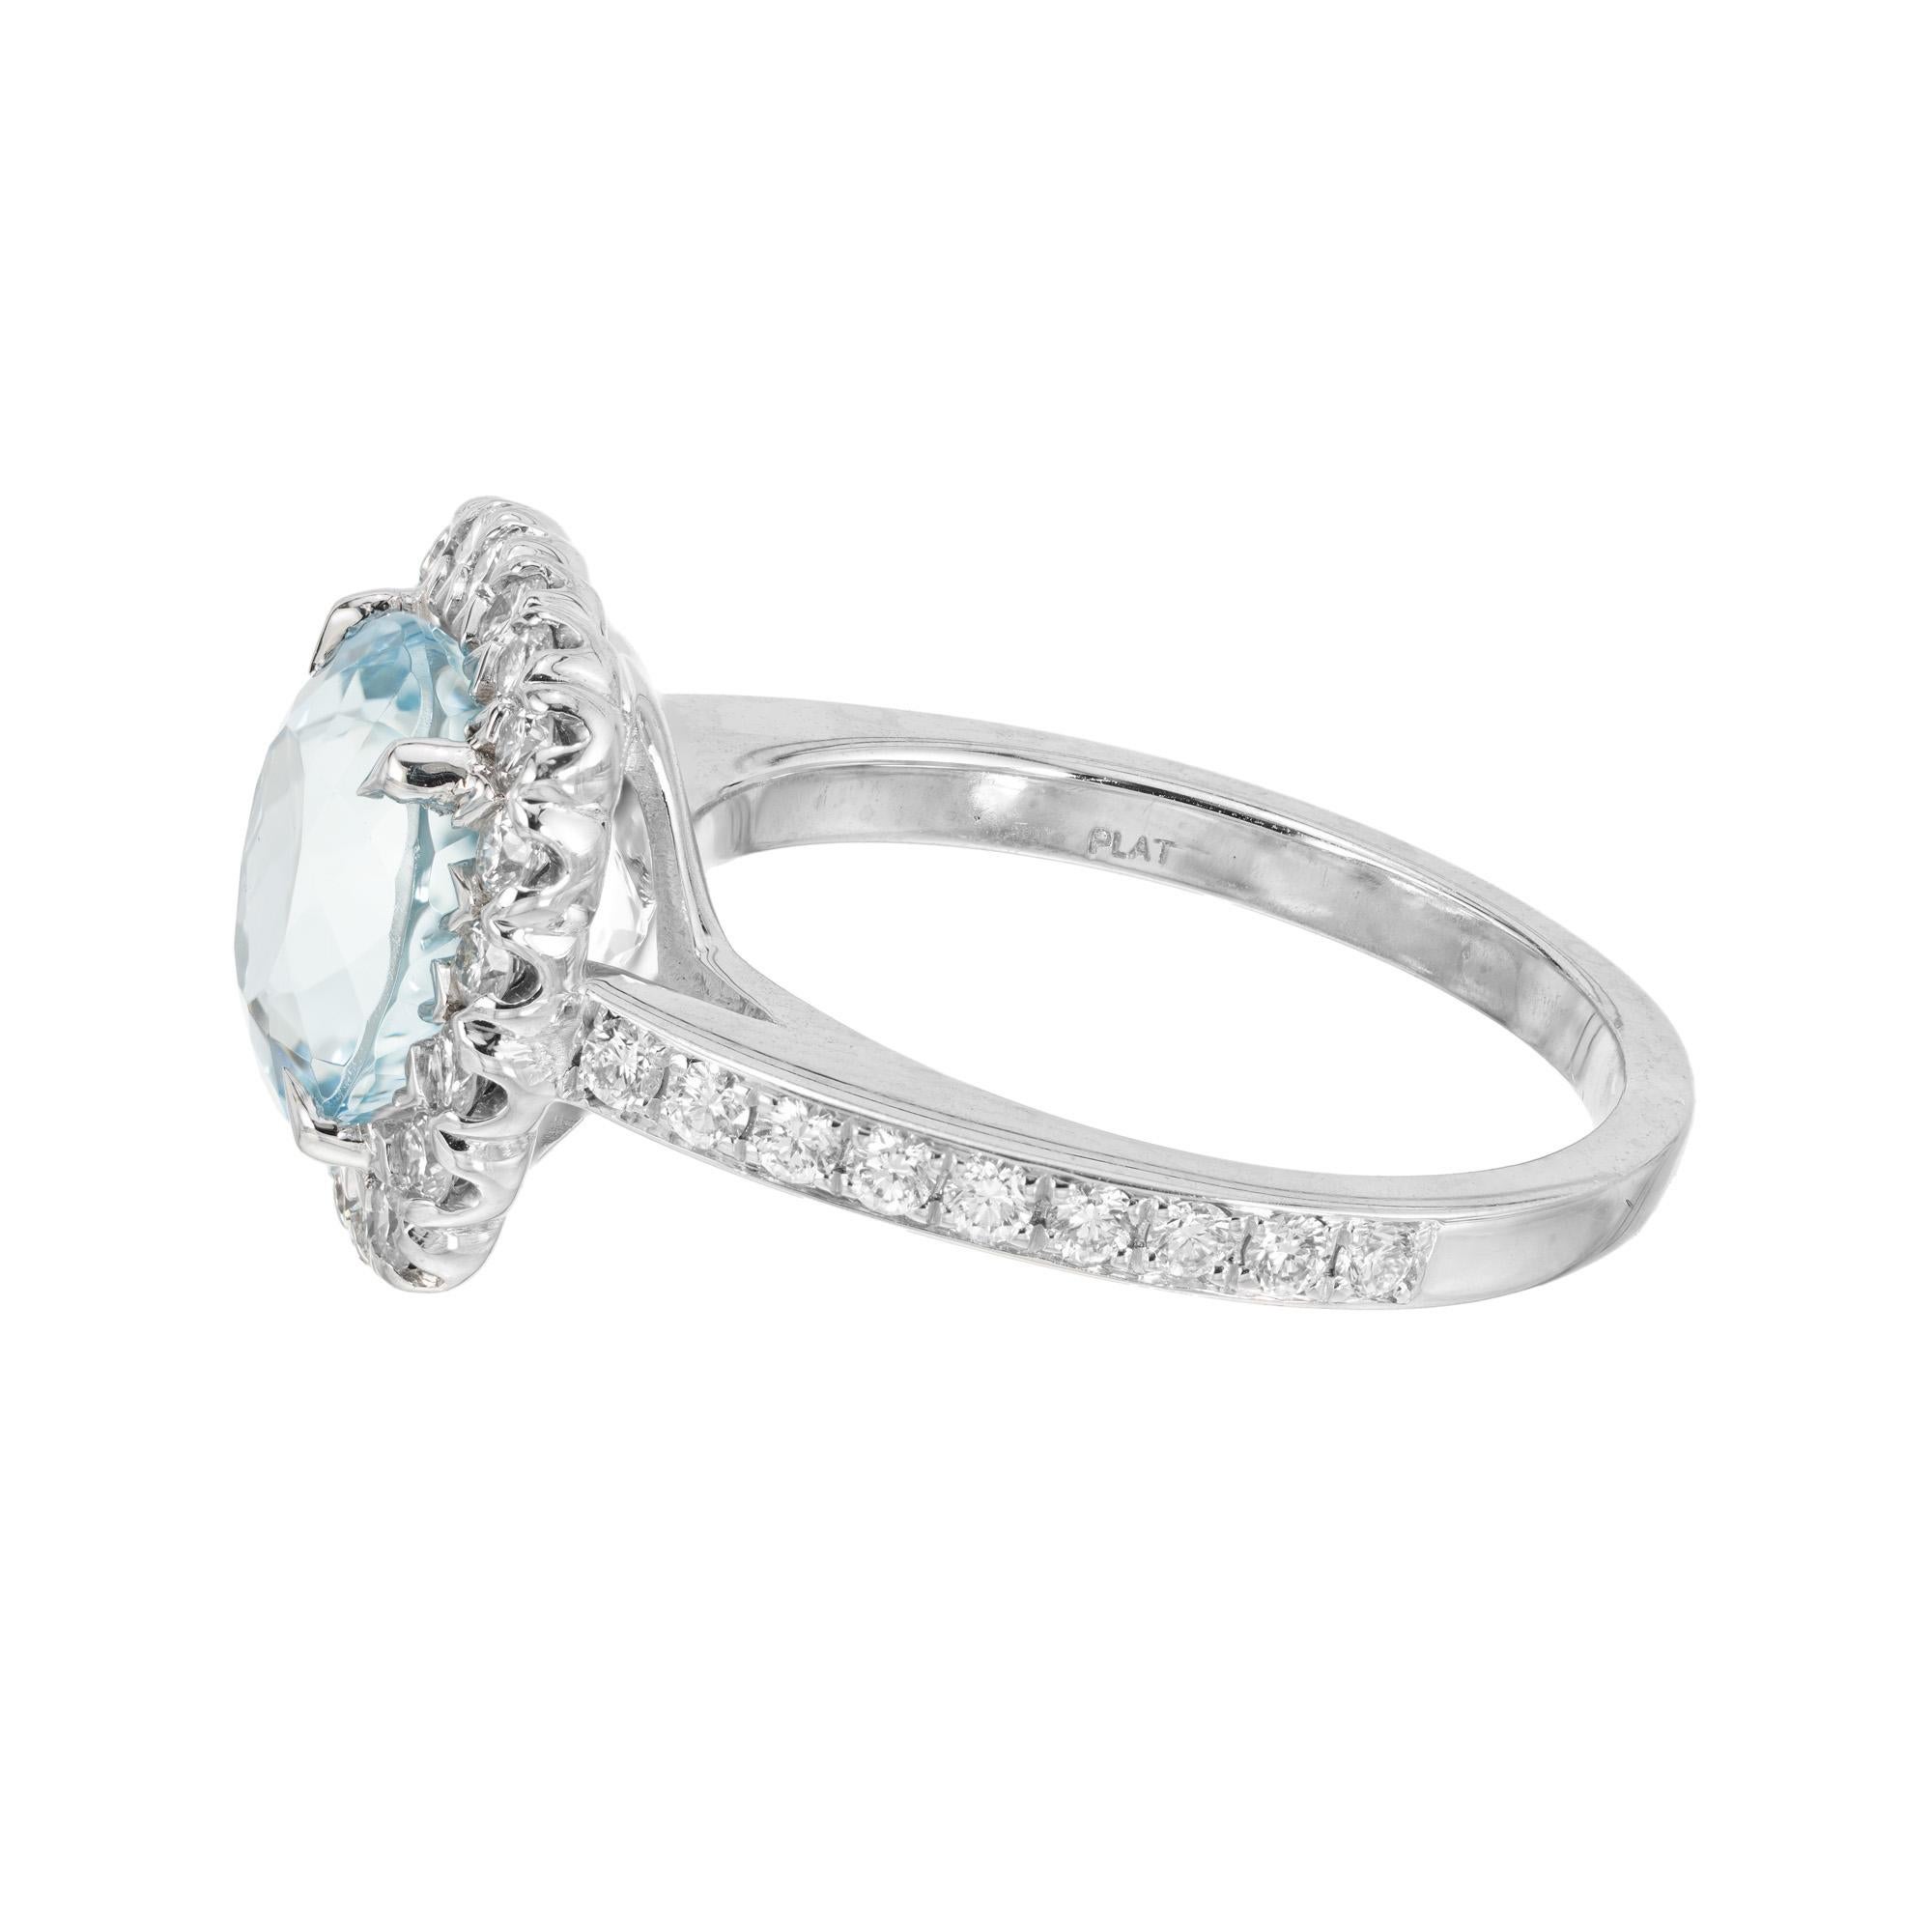 Peter Suchy 3.66 Carats Aquamarine Diamond Halo Platinum Engagement Ring  In New Condition For Sale In Stamford, CT